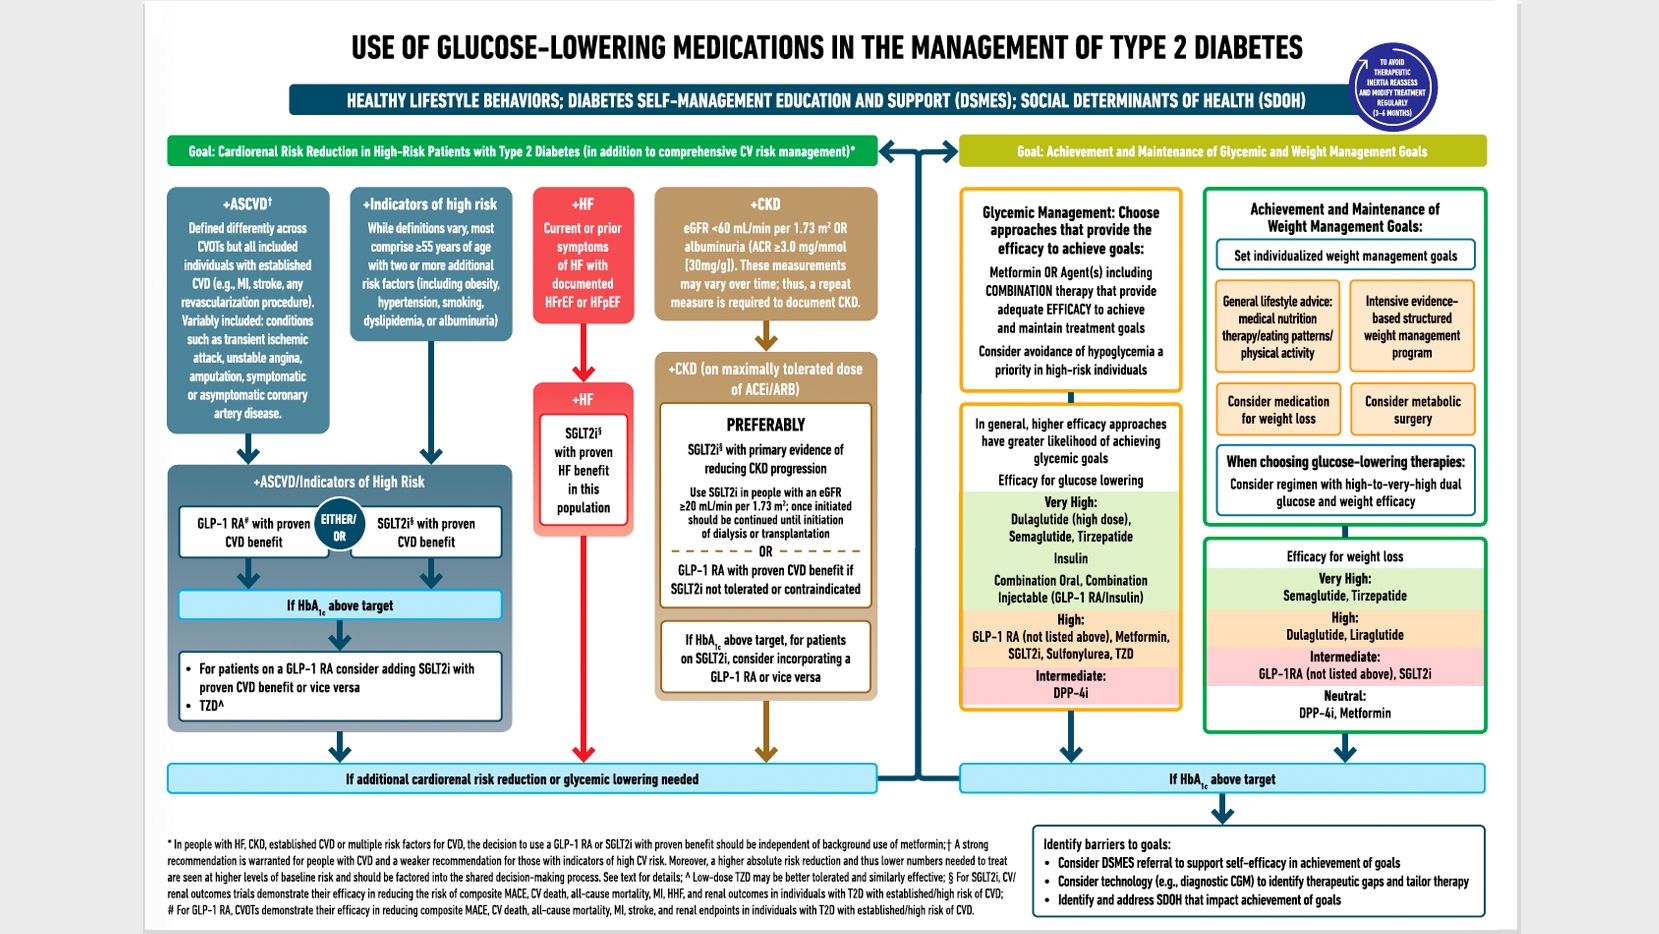 ADA/EASD consensus report for early treatment